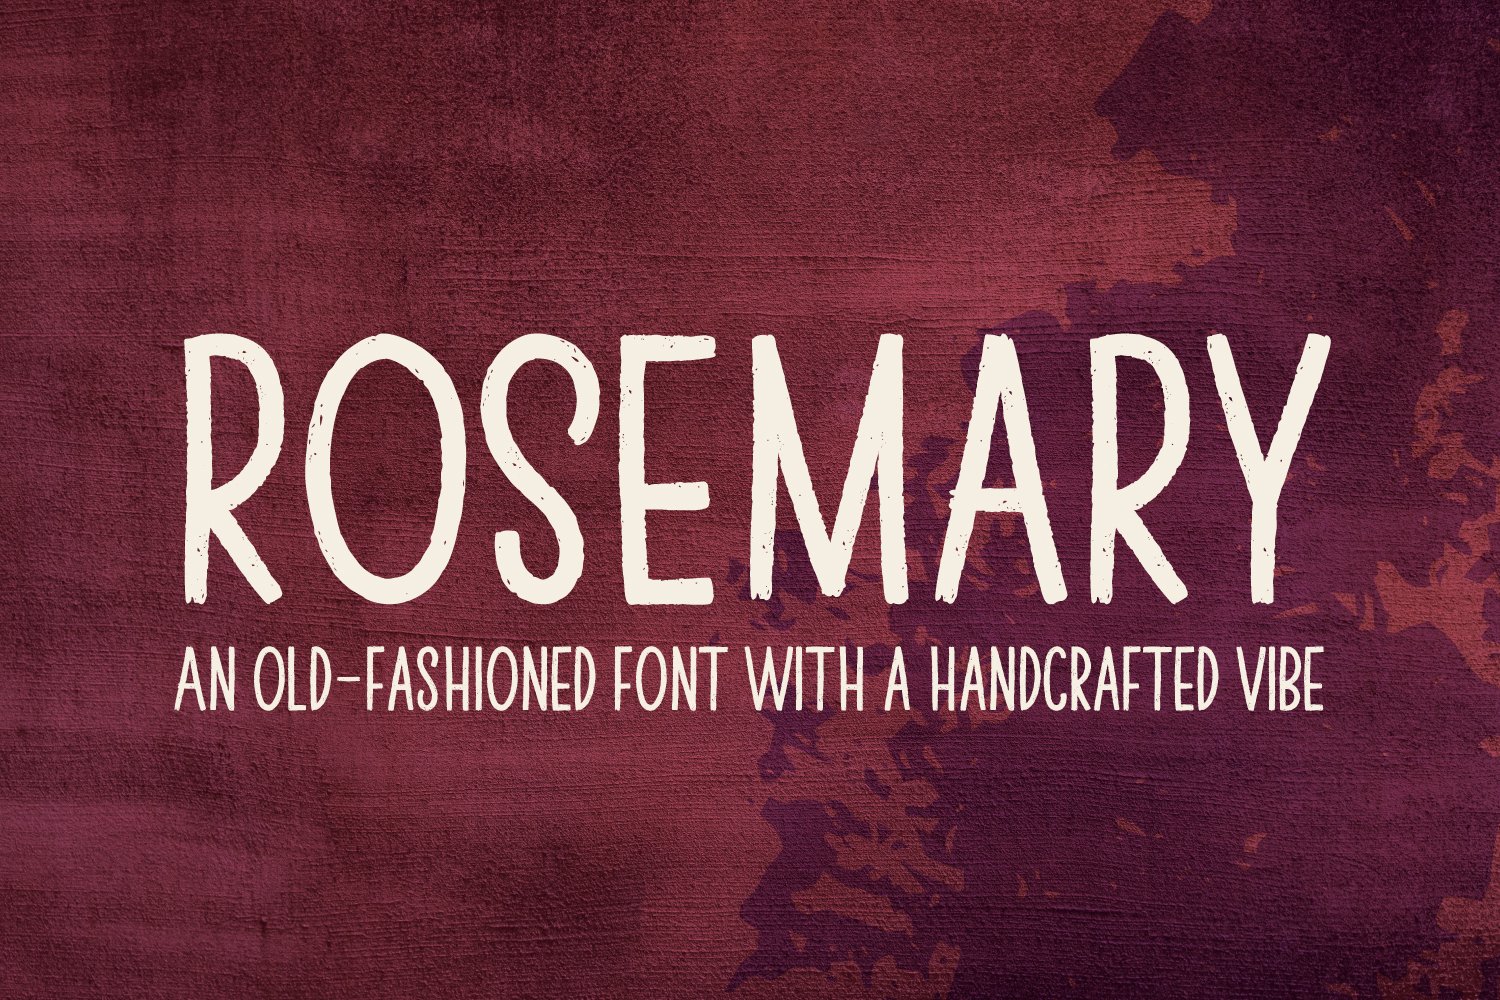 Rosemary cover image.